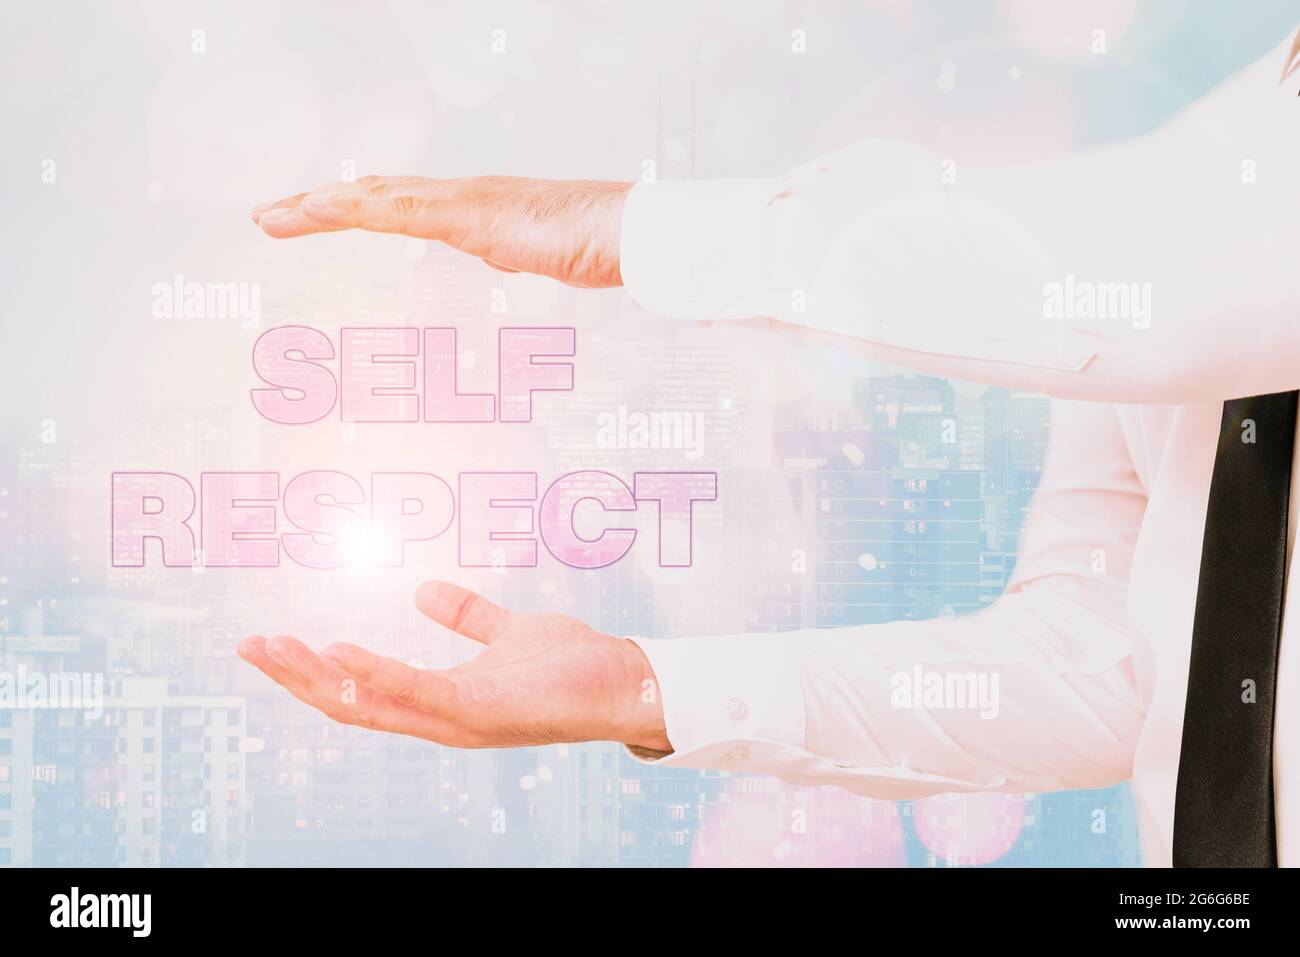 Handwriting text Self Respect. Internet Concept Pride and confidence in oneself Stand up for yourself Inspirational business technology concept with Stock Photo